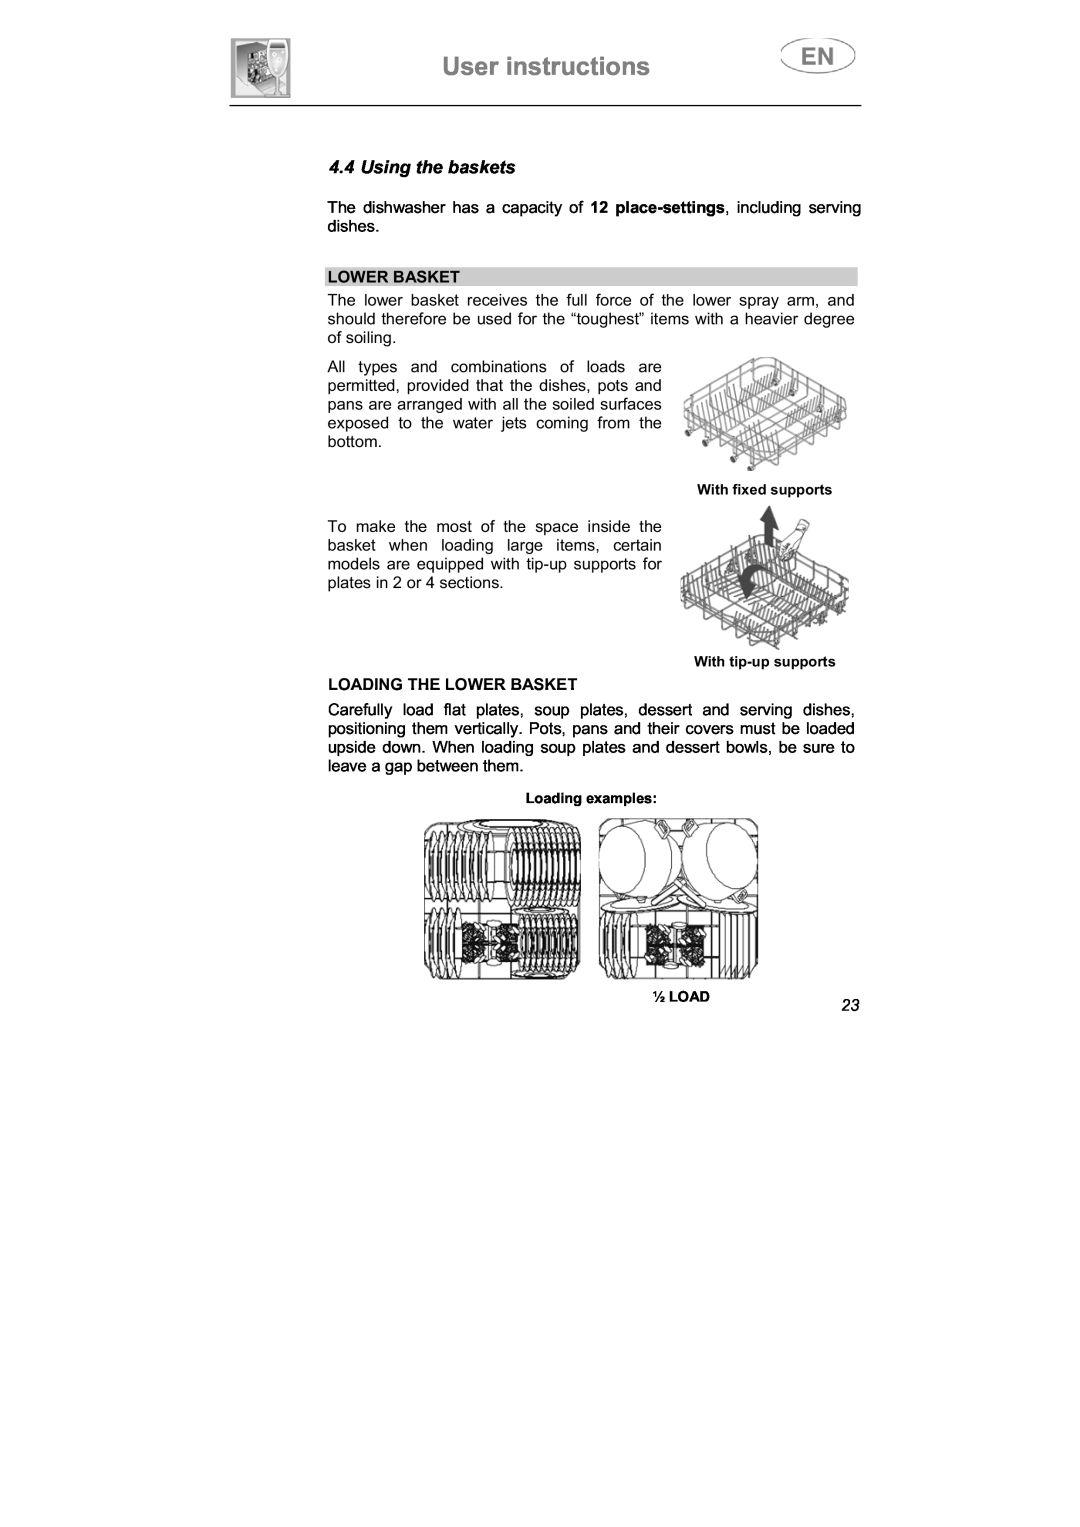 Smeg LSPX1253 manual User instructions, Using the baskets, Loading The Lower Basket 